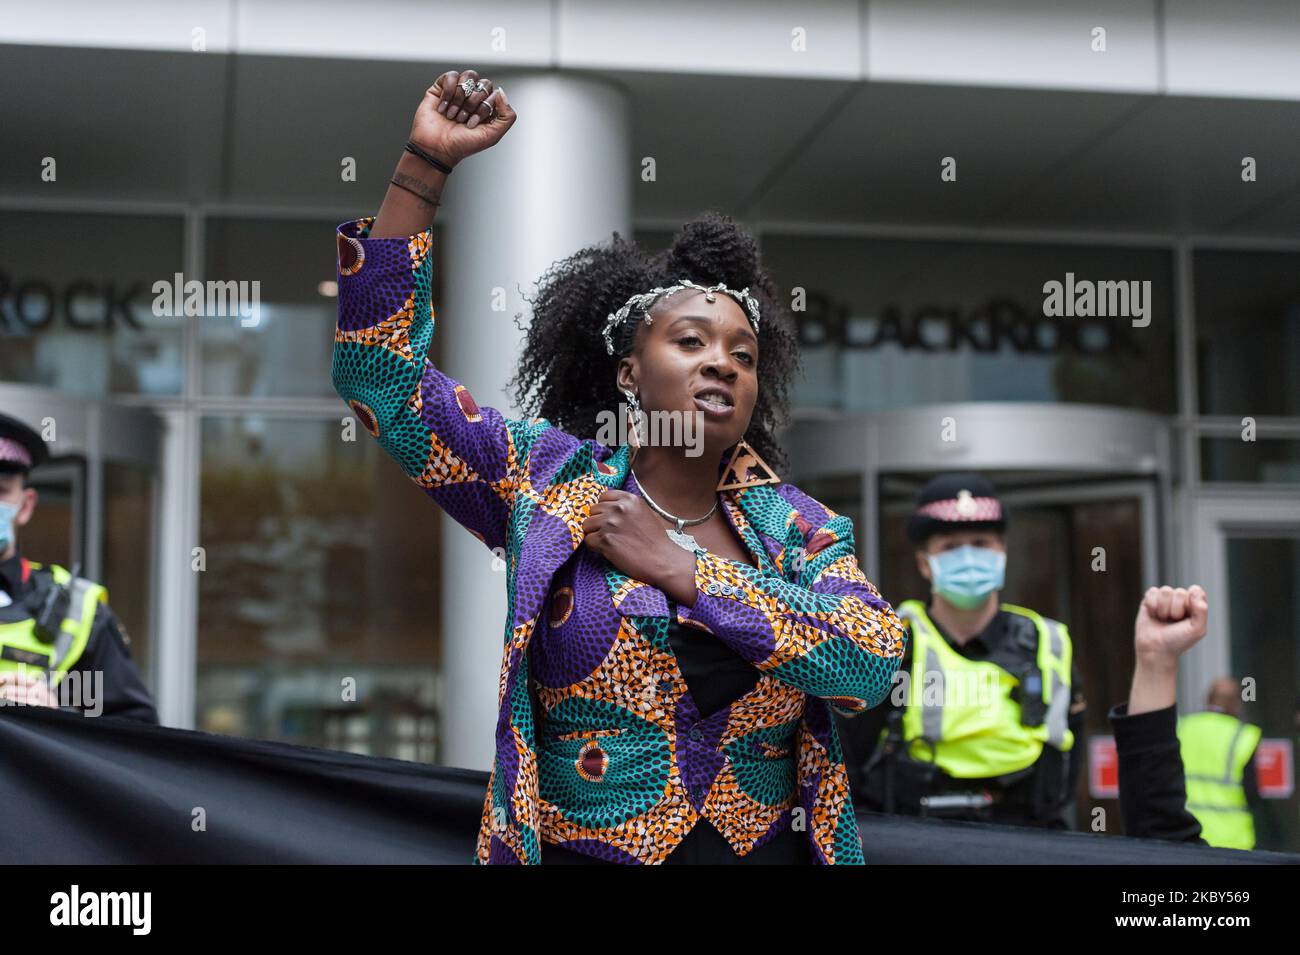 Activist Marvina Newton makes a raised fist gesture outside the headquarters of BlackRock investment company during Extinction Rebellion march through the City of London to protest against the companies and institutions that profited from the slave trade or are financing and insuring major fossil fuel projects and extraction of resources, particularly in the developing countries of the Global South, on 04 September, 2020 in London, England. Protesters demand reparations for communities affected by colonial and neo-colonial exploitation. (Photo by WIktor Szymanowicz/NurPhoto) Stock Photo